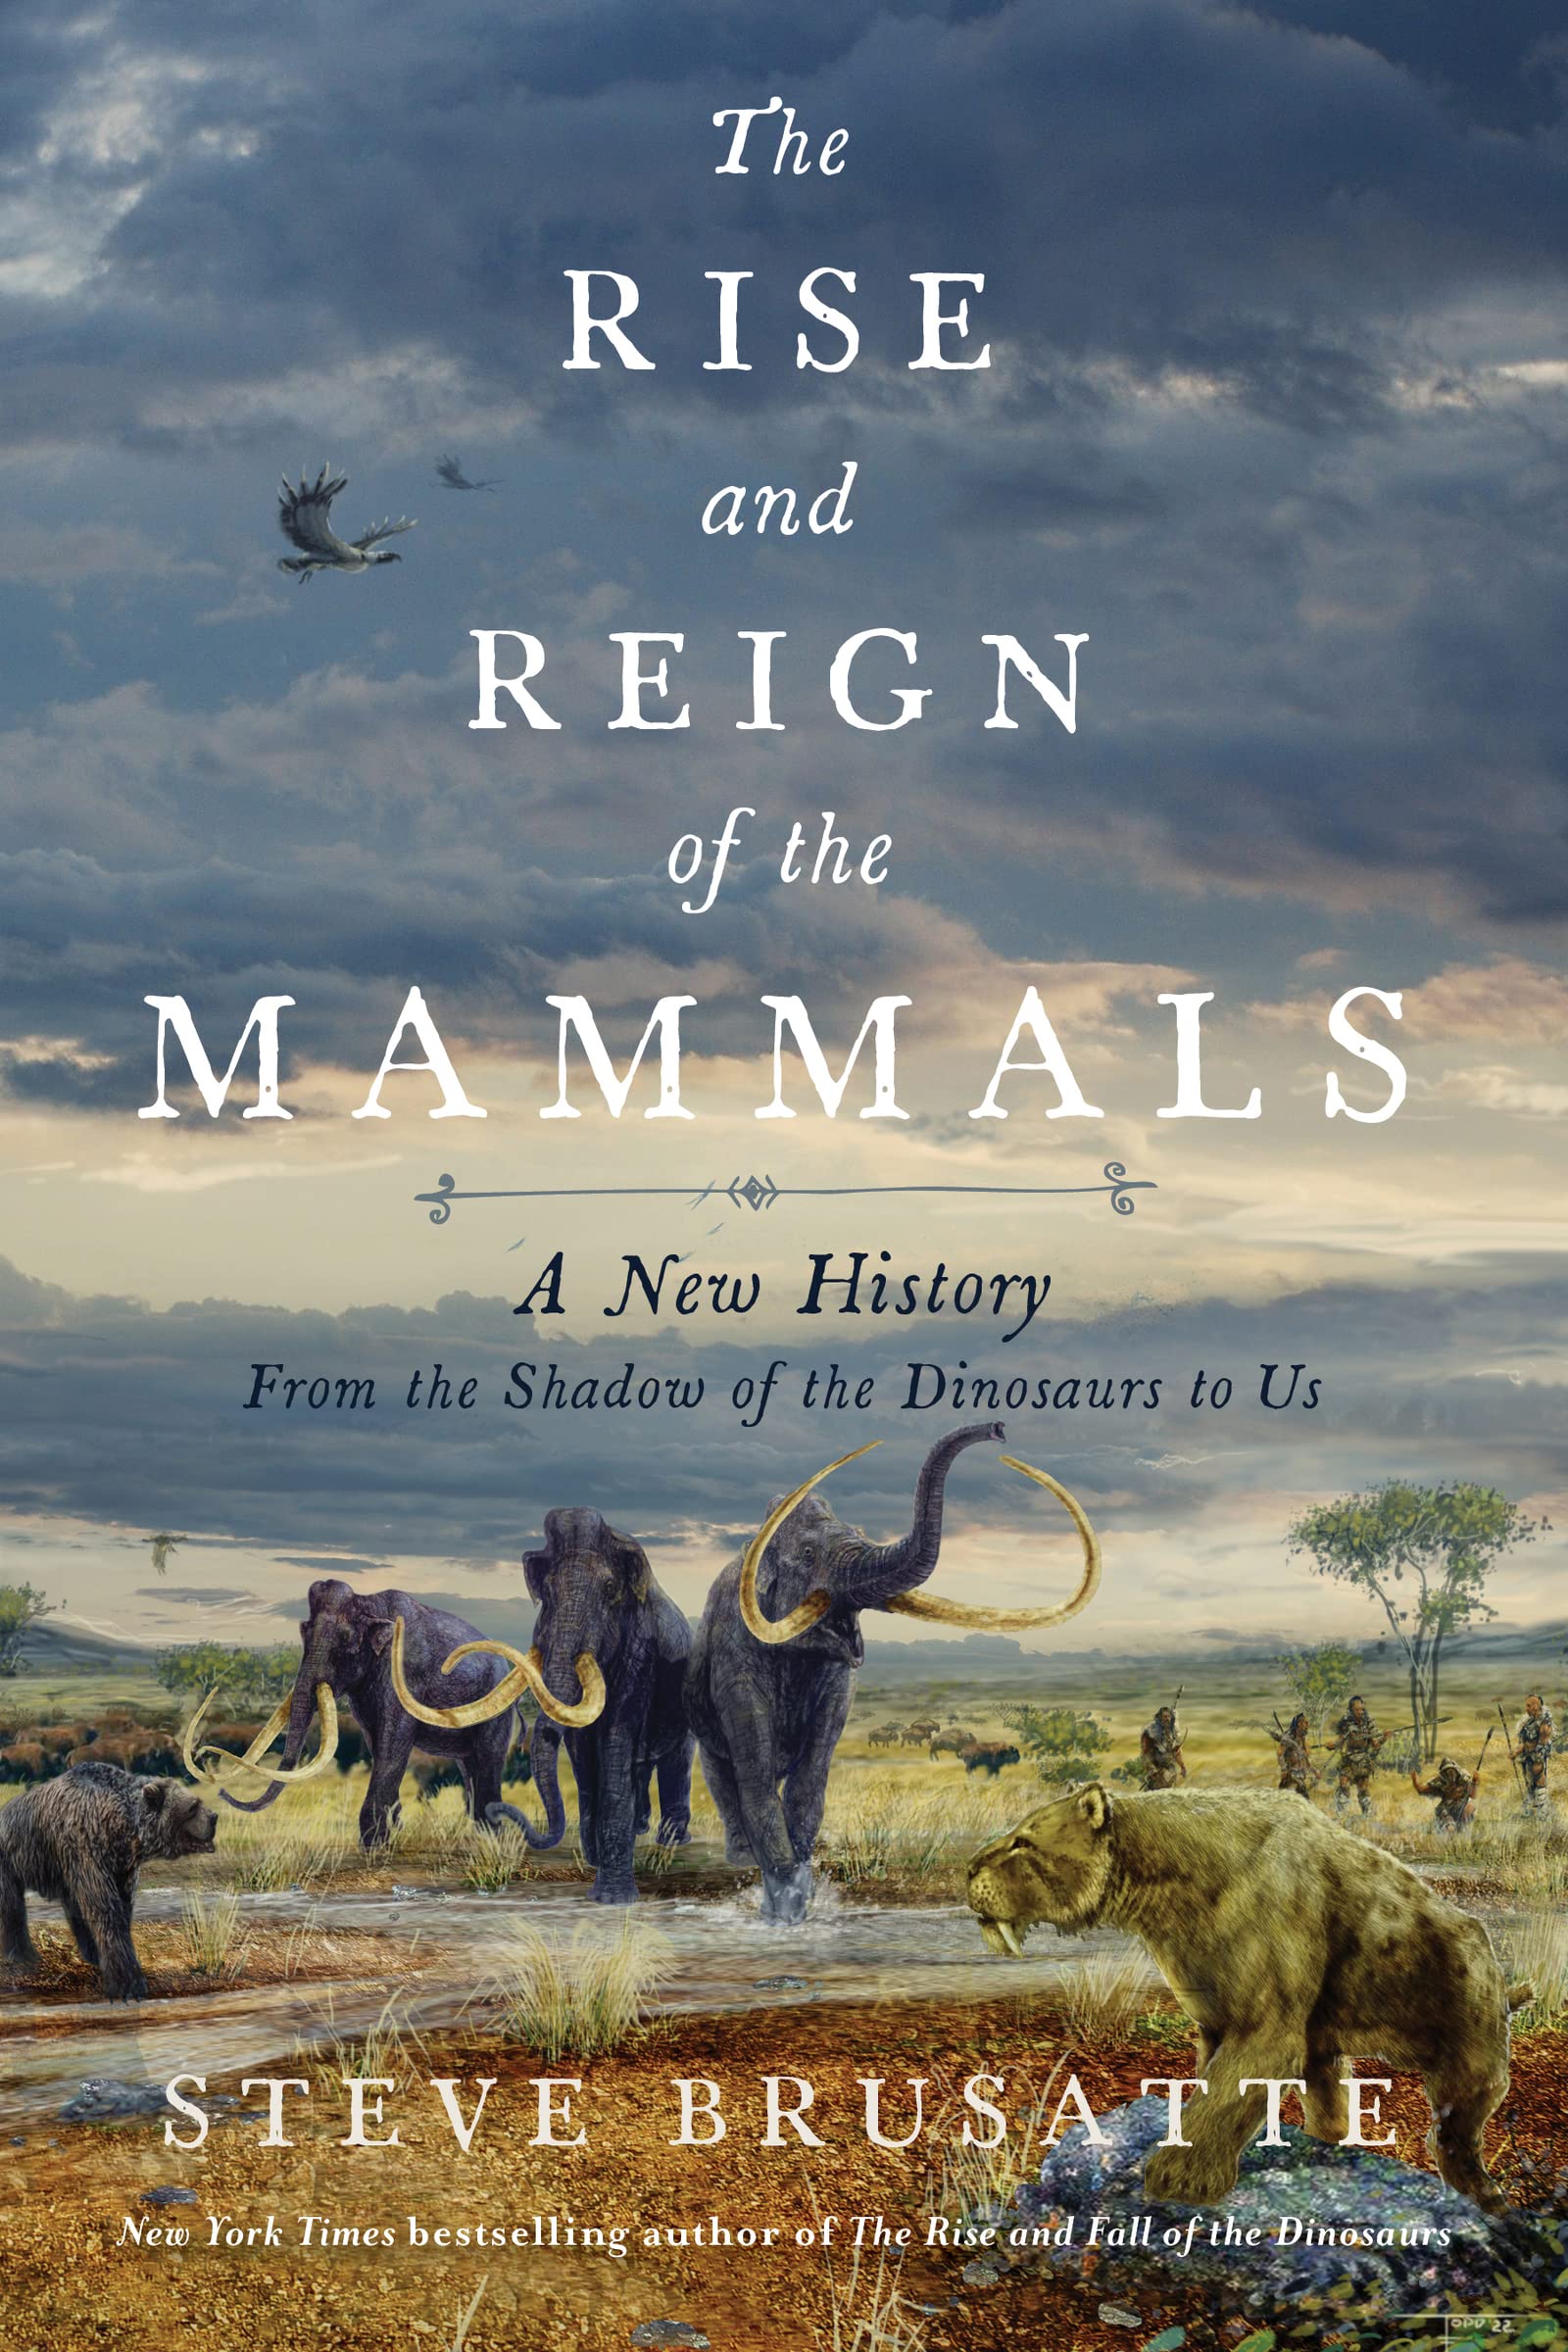 The Rise and Reign of the Mammals, by Steve Brusatte